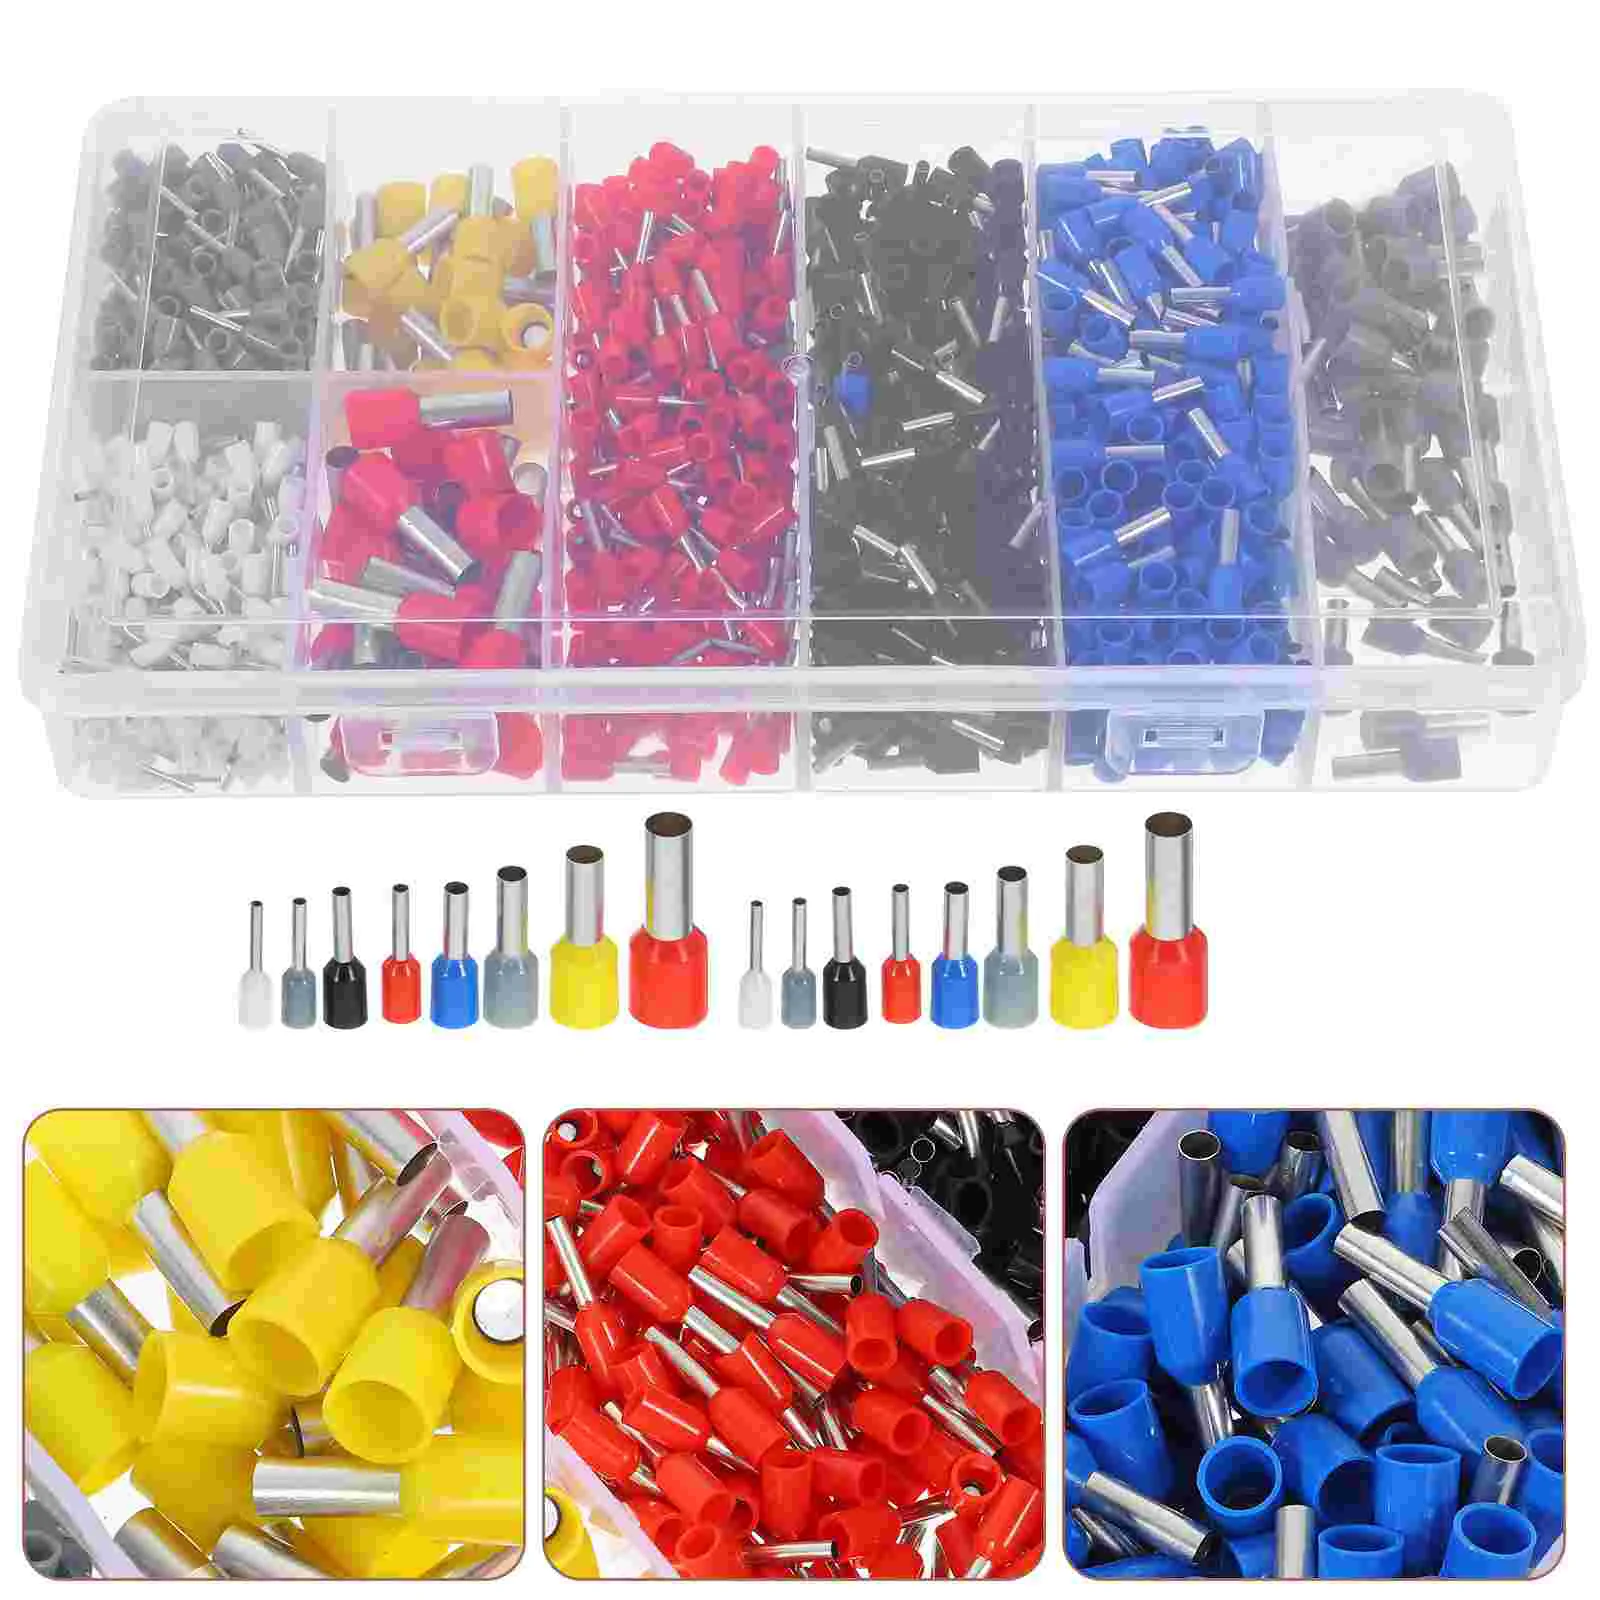 

1200 Pcs Cold-pressed Terminal Motor Bikes Wire Electrical Connectors Wiring Ferrules Crimping Tool Kit Pvc